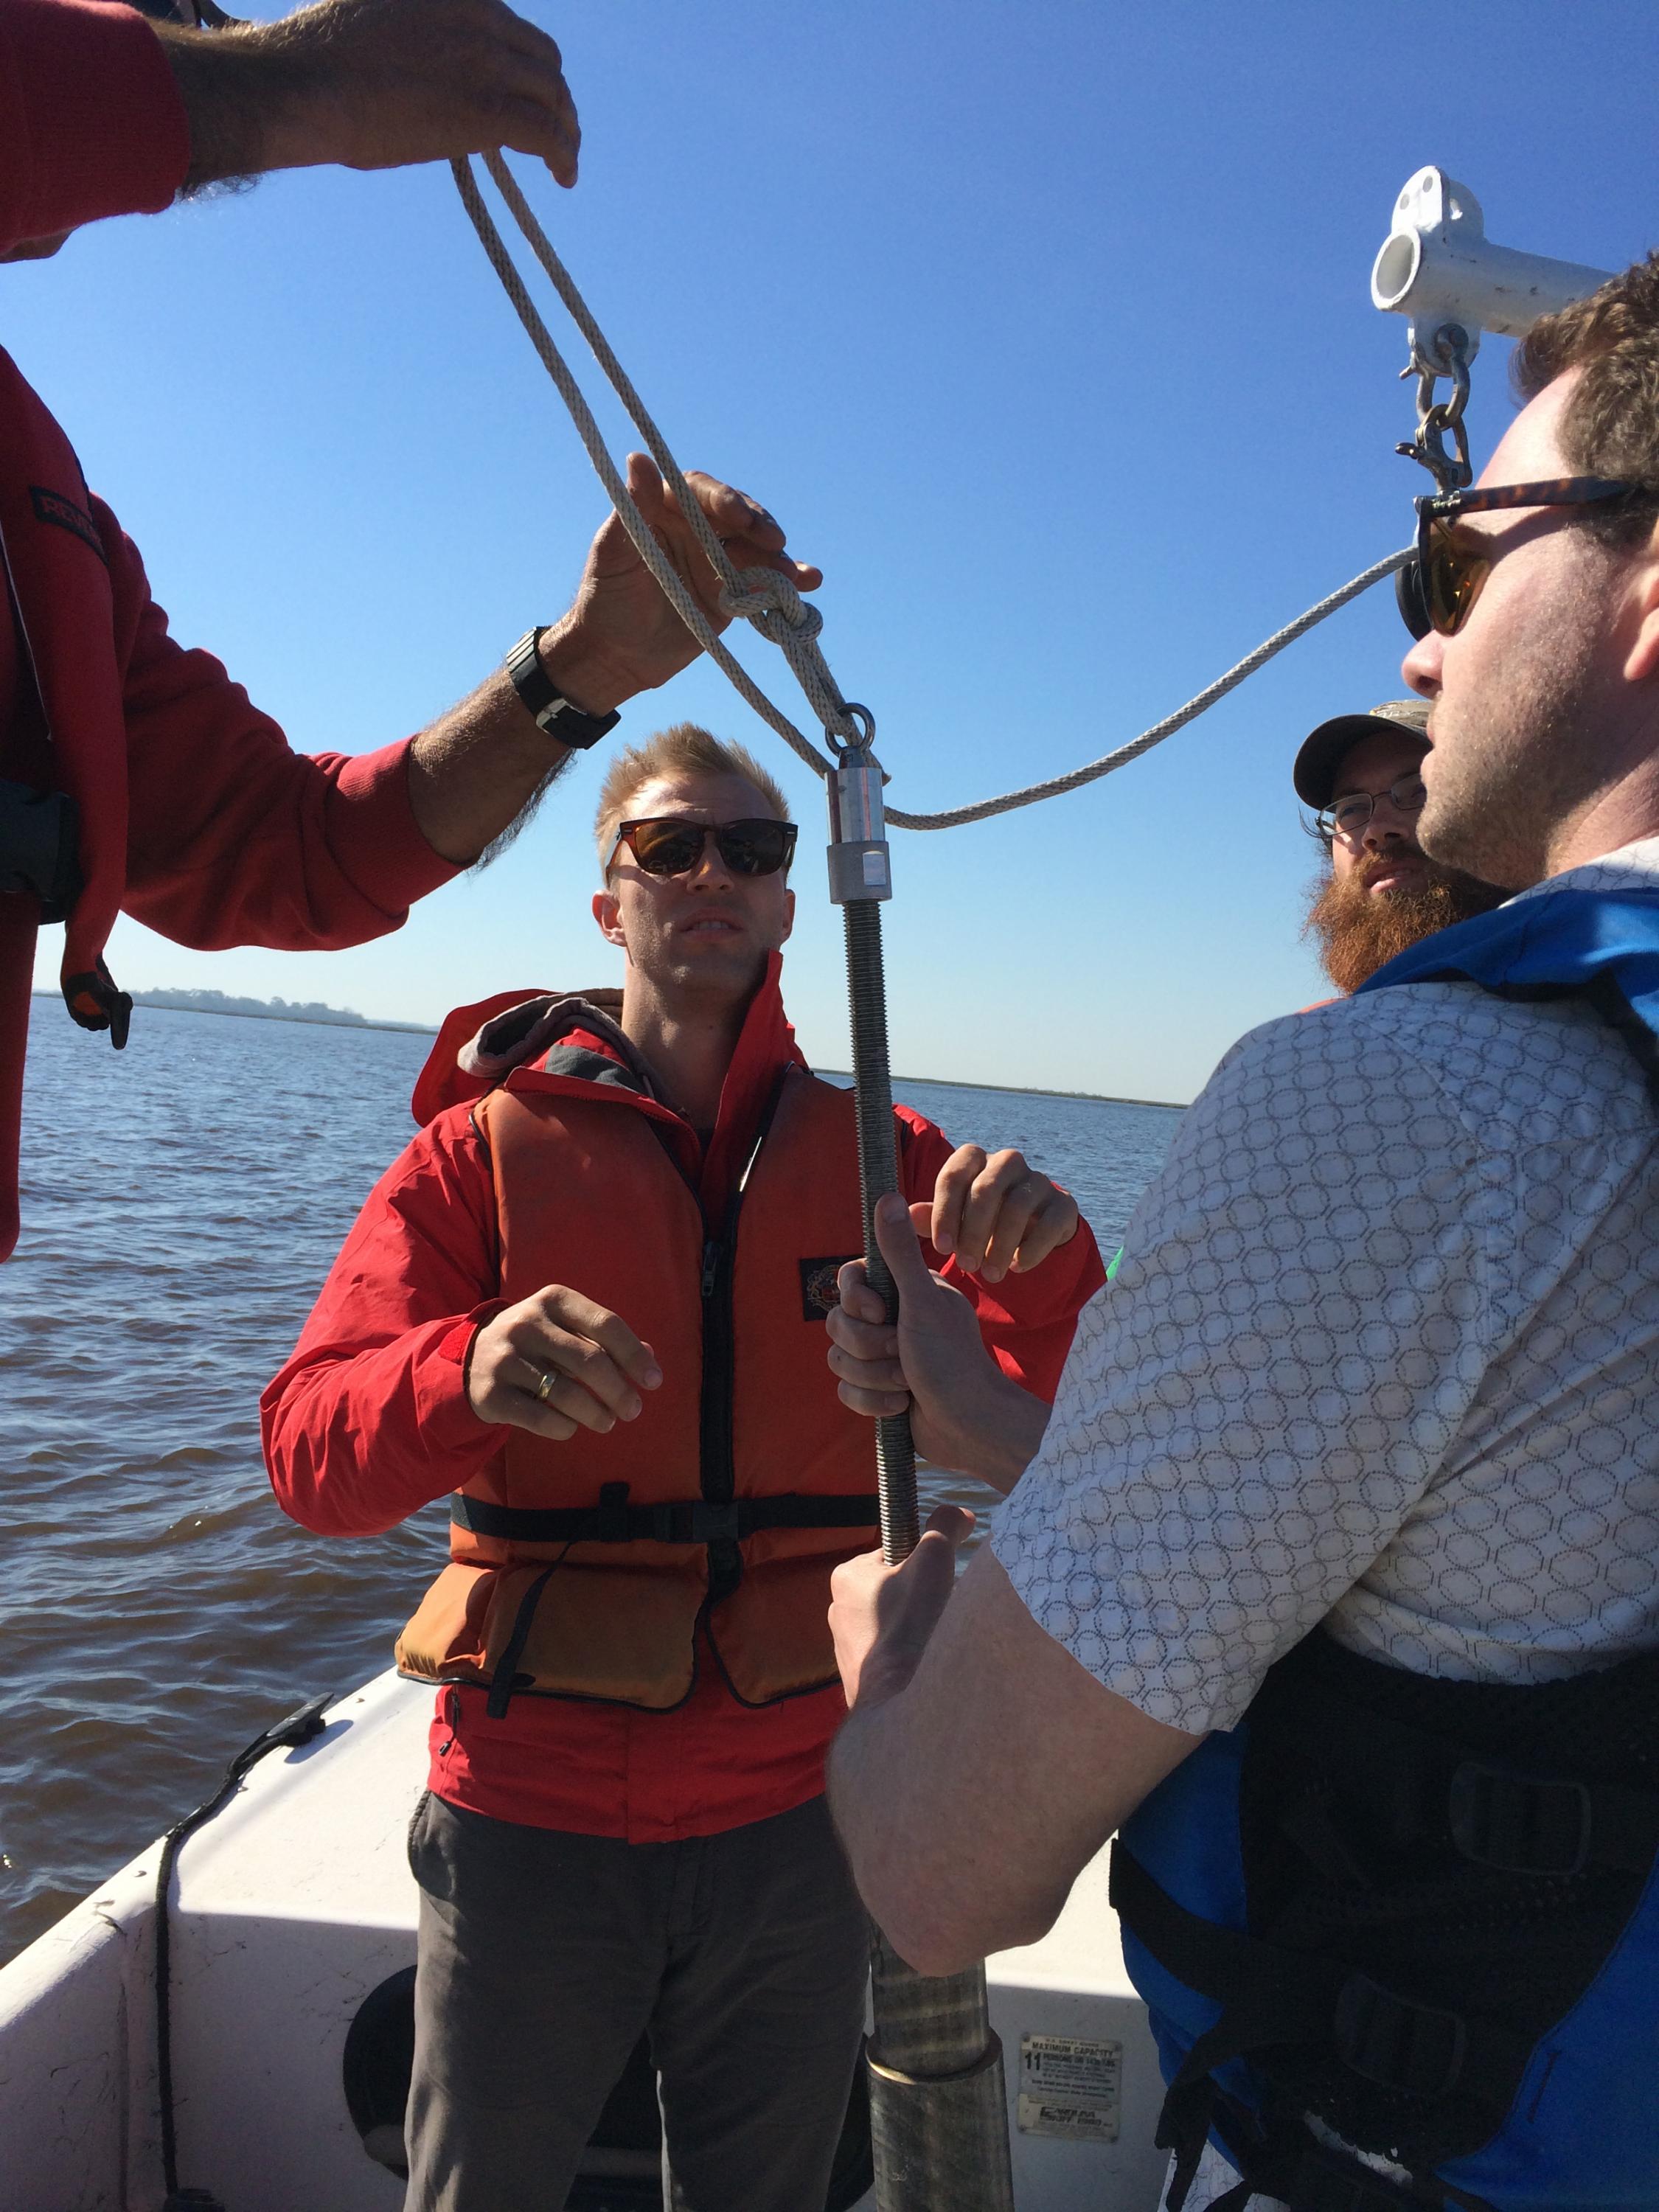 Yale's Noah Planavsky (left) and Georgia Tech's Chris Reinhard (right, front) collecting estuarine sediment core samples with the goal of better understanding how animal life controls phosphorus cycling at the seabed.